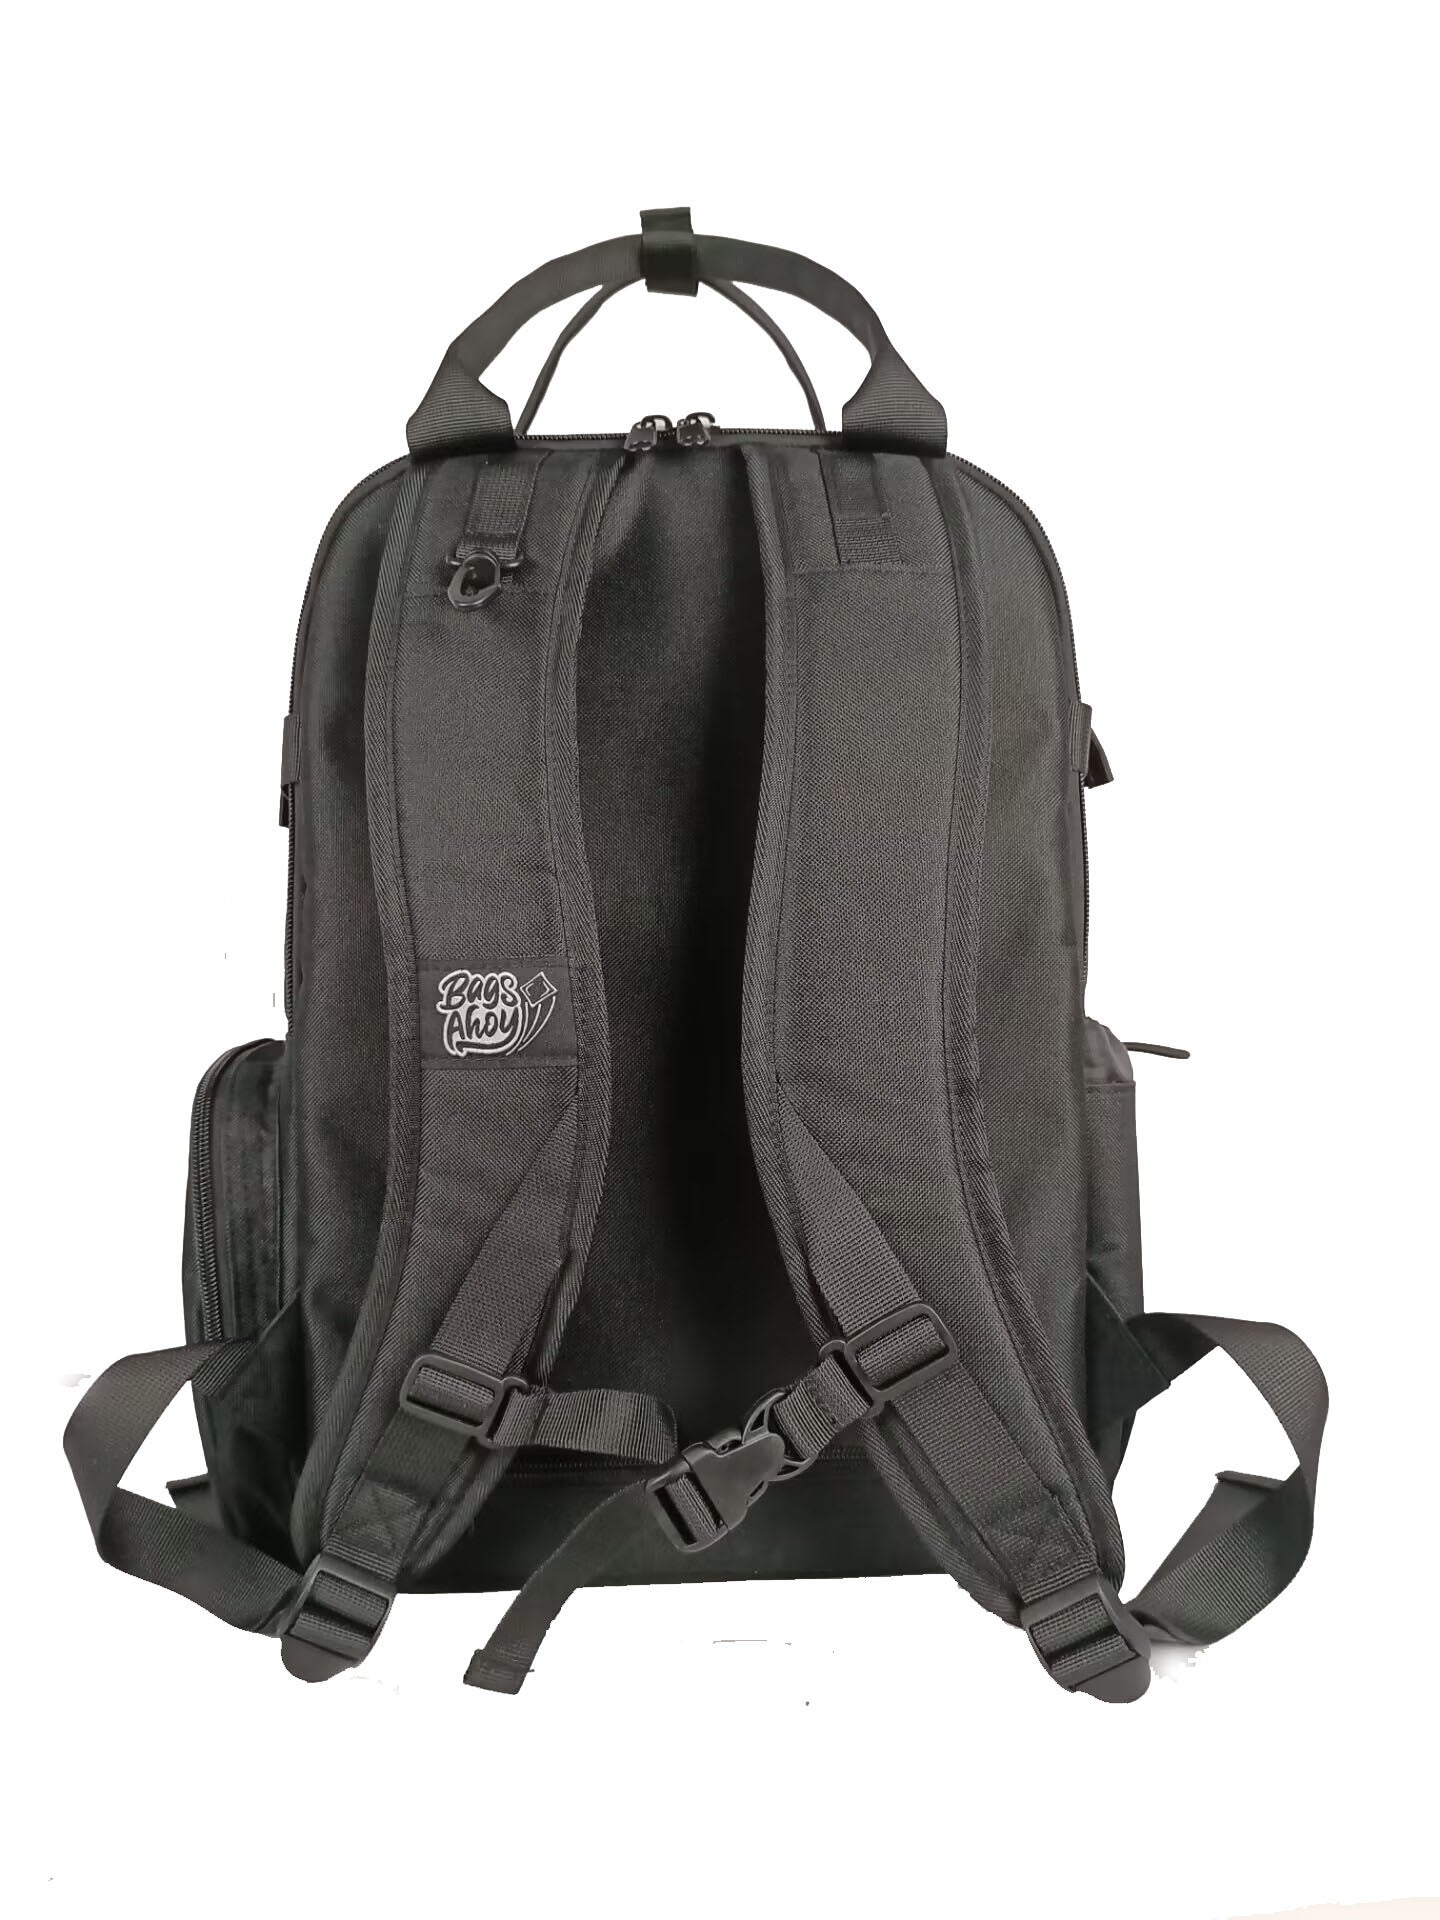 RYOT SmellProof DRY+ Backpack / $ 159.99 at 420 Science